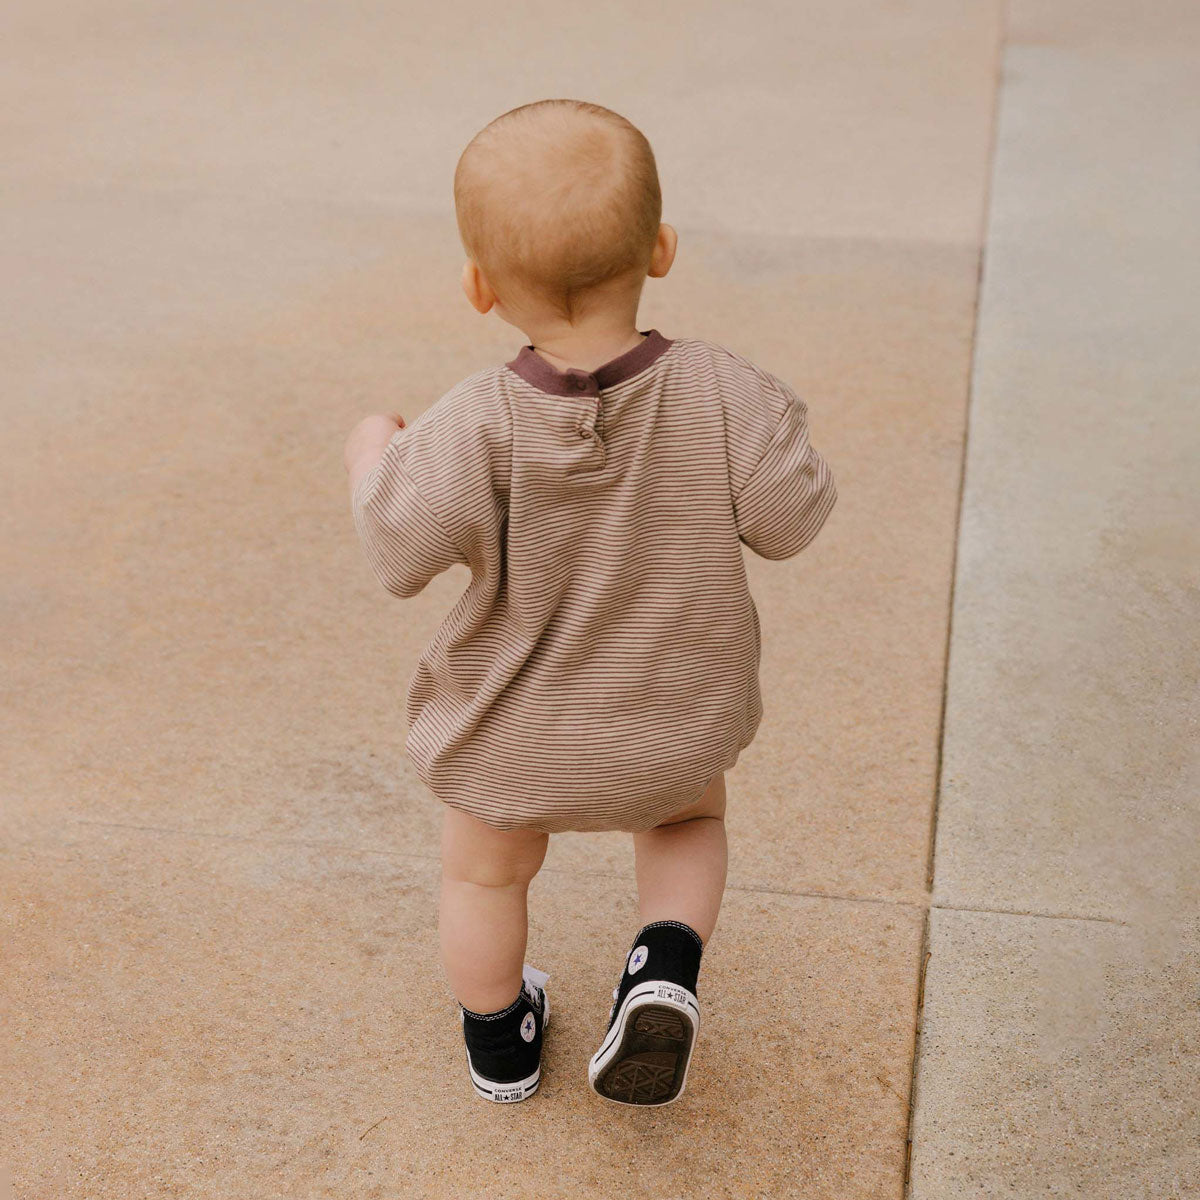 Toddler wearing Rylee and Cru Relaxed Short Sleeve Bubble Romper - Micro Stripe - Plum / Sand Stripe